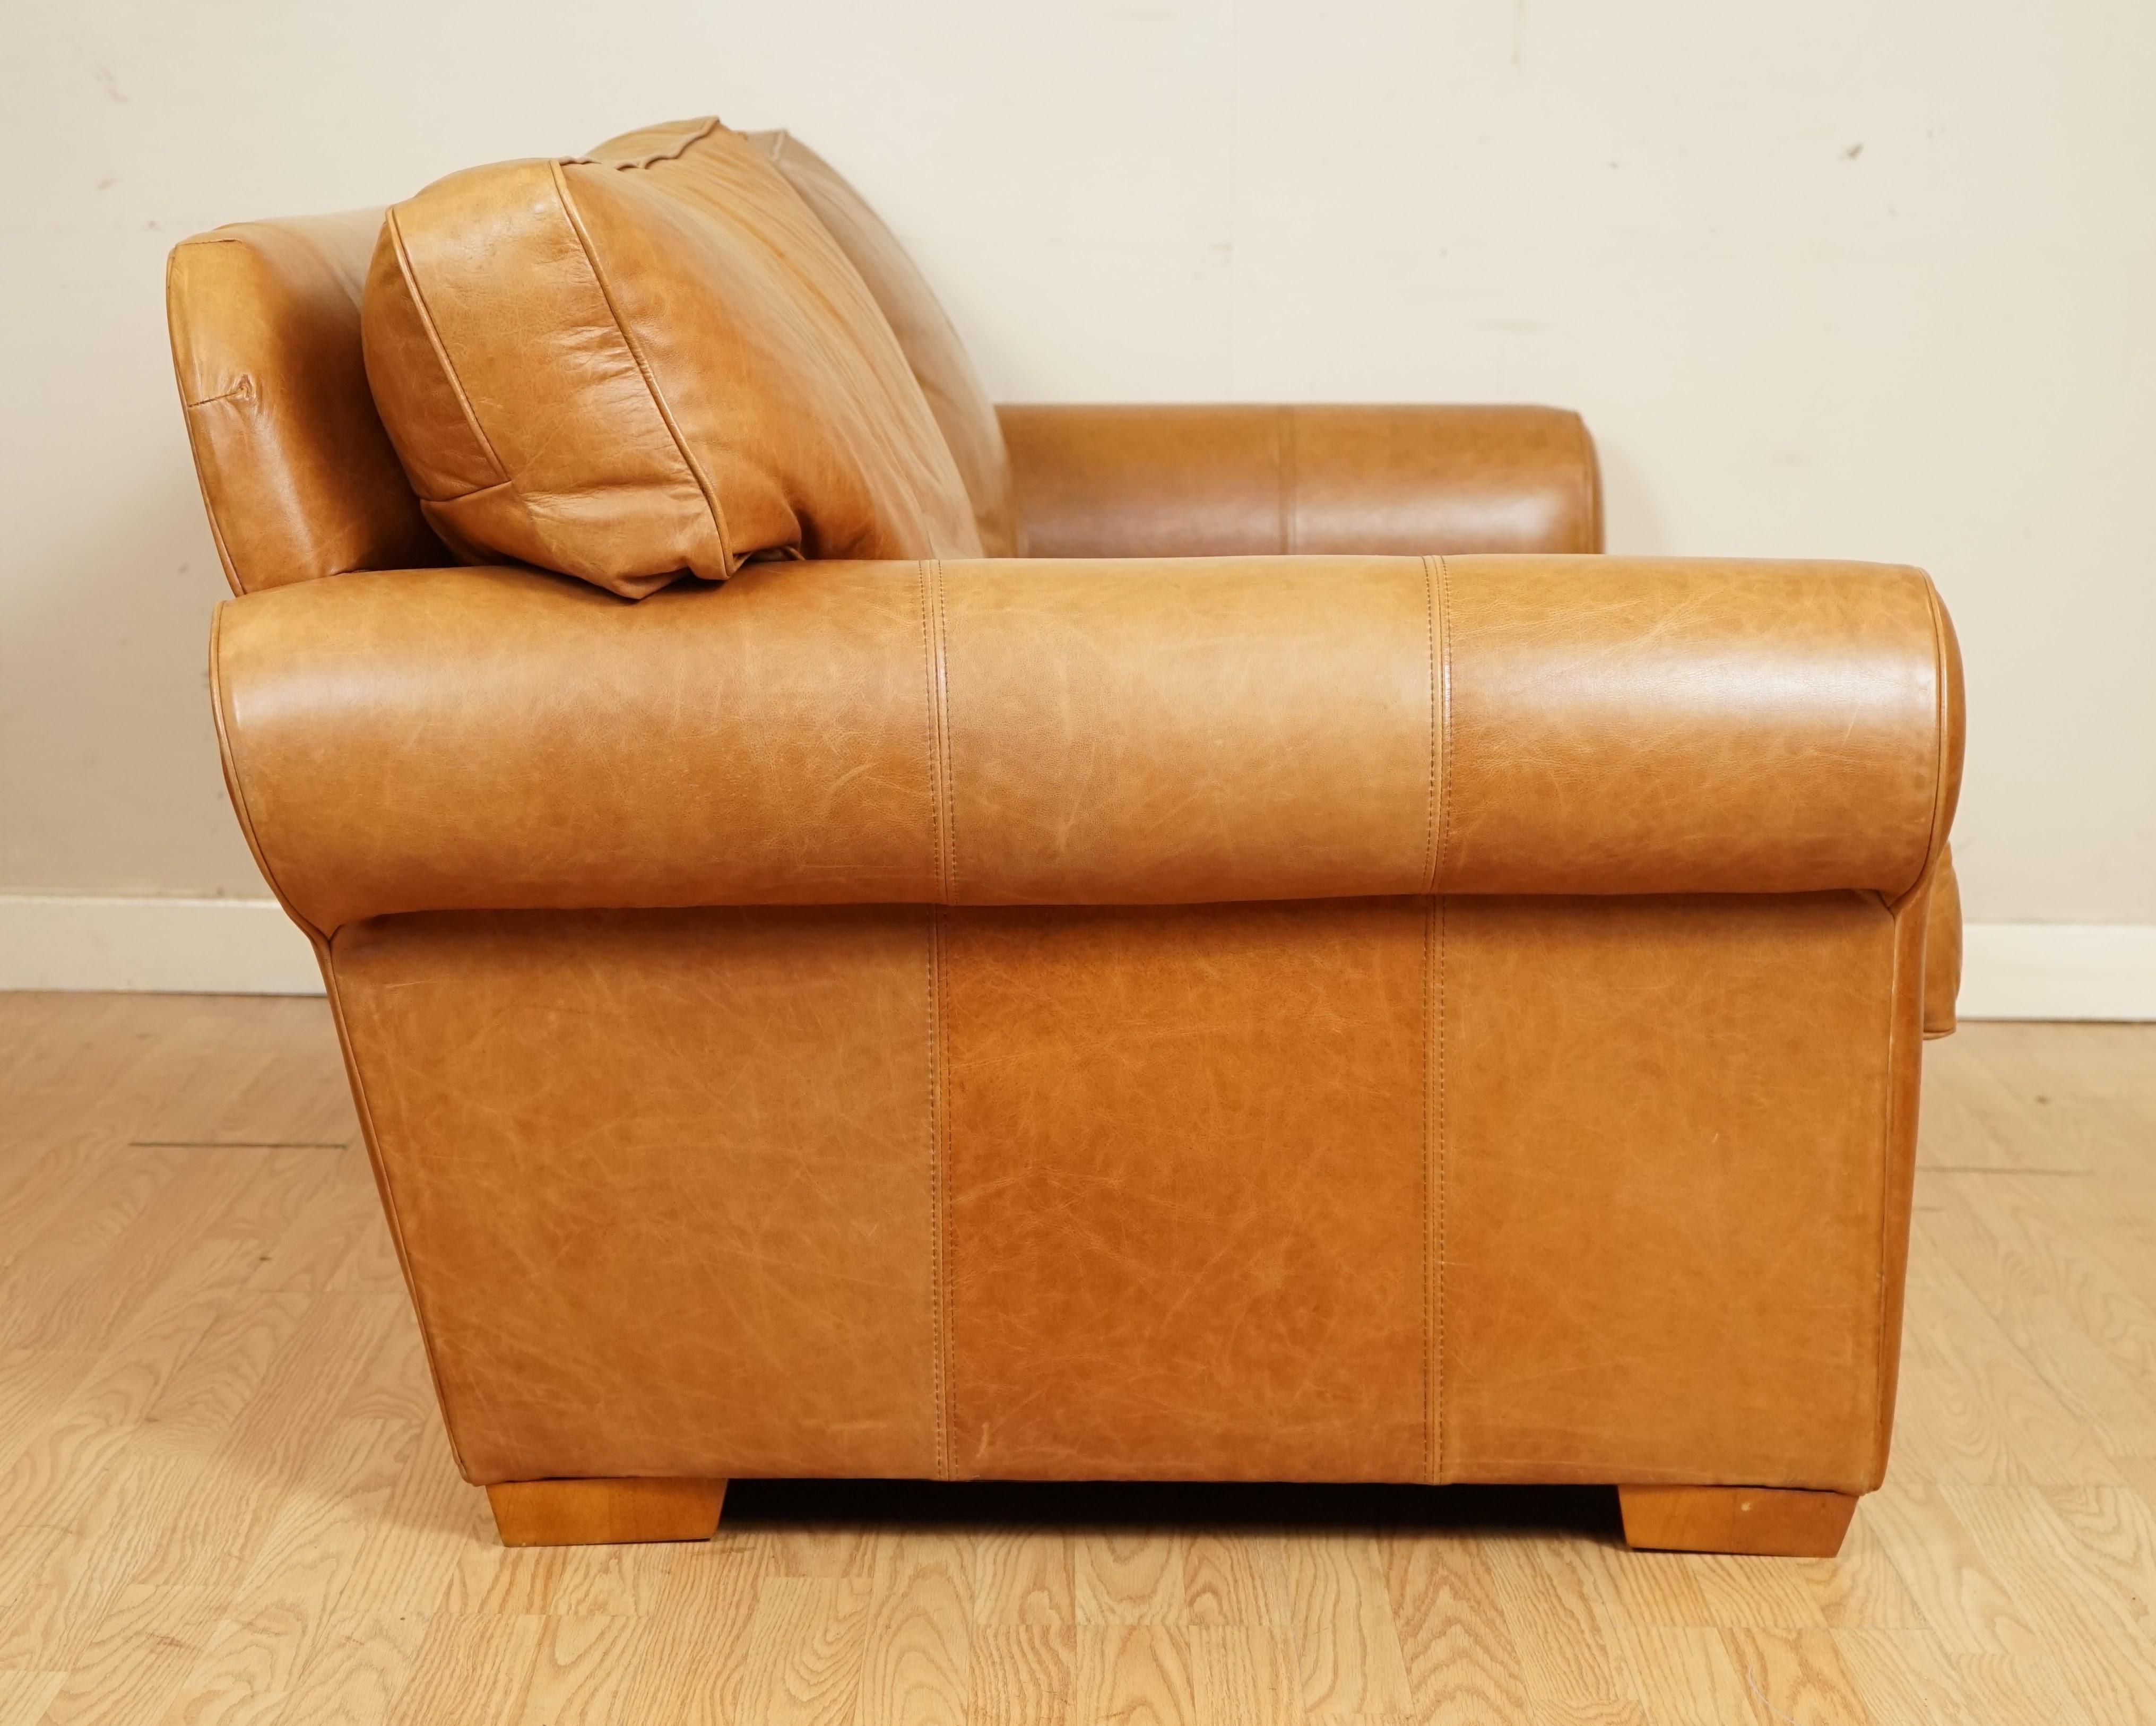 Sumptuous Multiyork Buttery Soft Tan Leather Two Three Seater Sofa 4